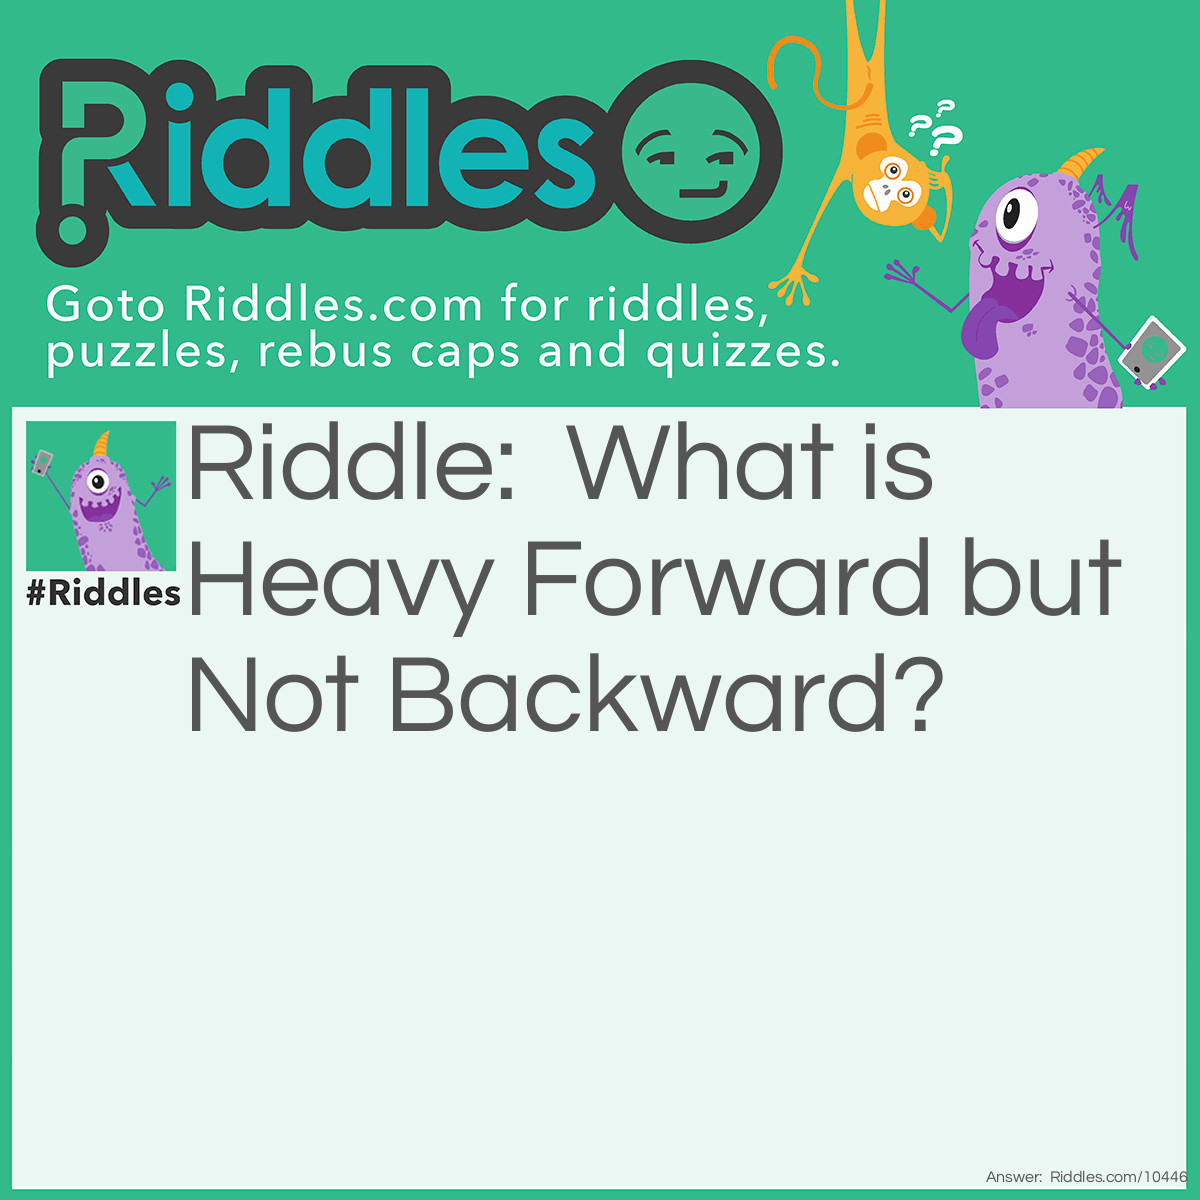 Riddle: What is Heavy Forward but Not Backward? Answer: a belly.